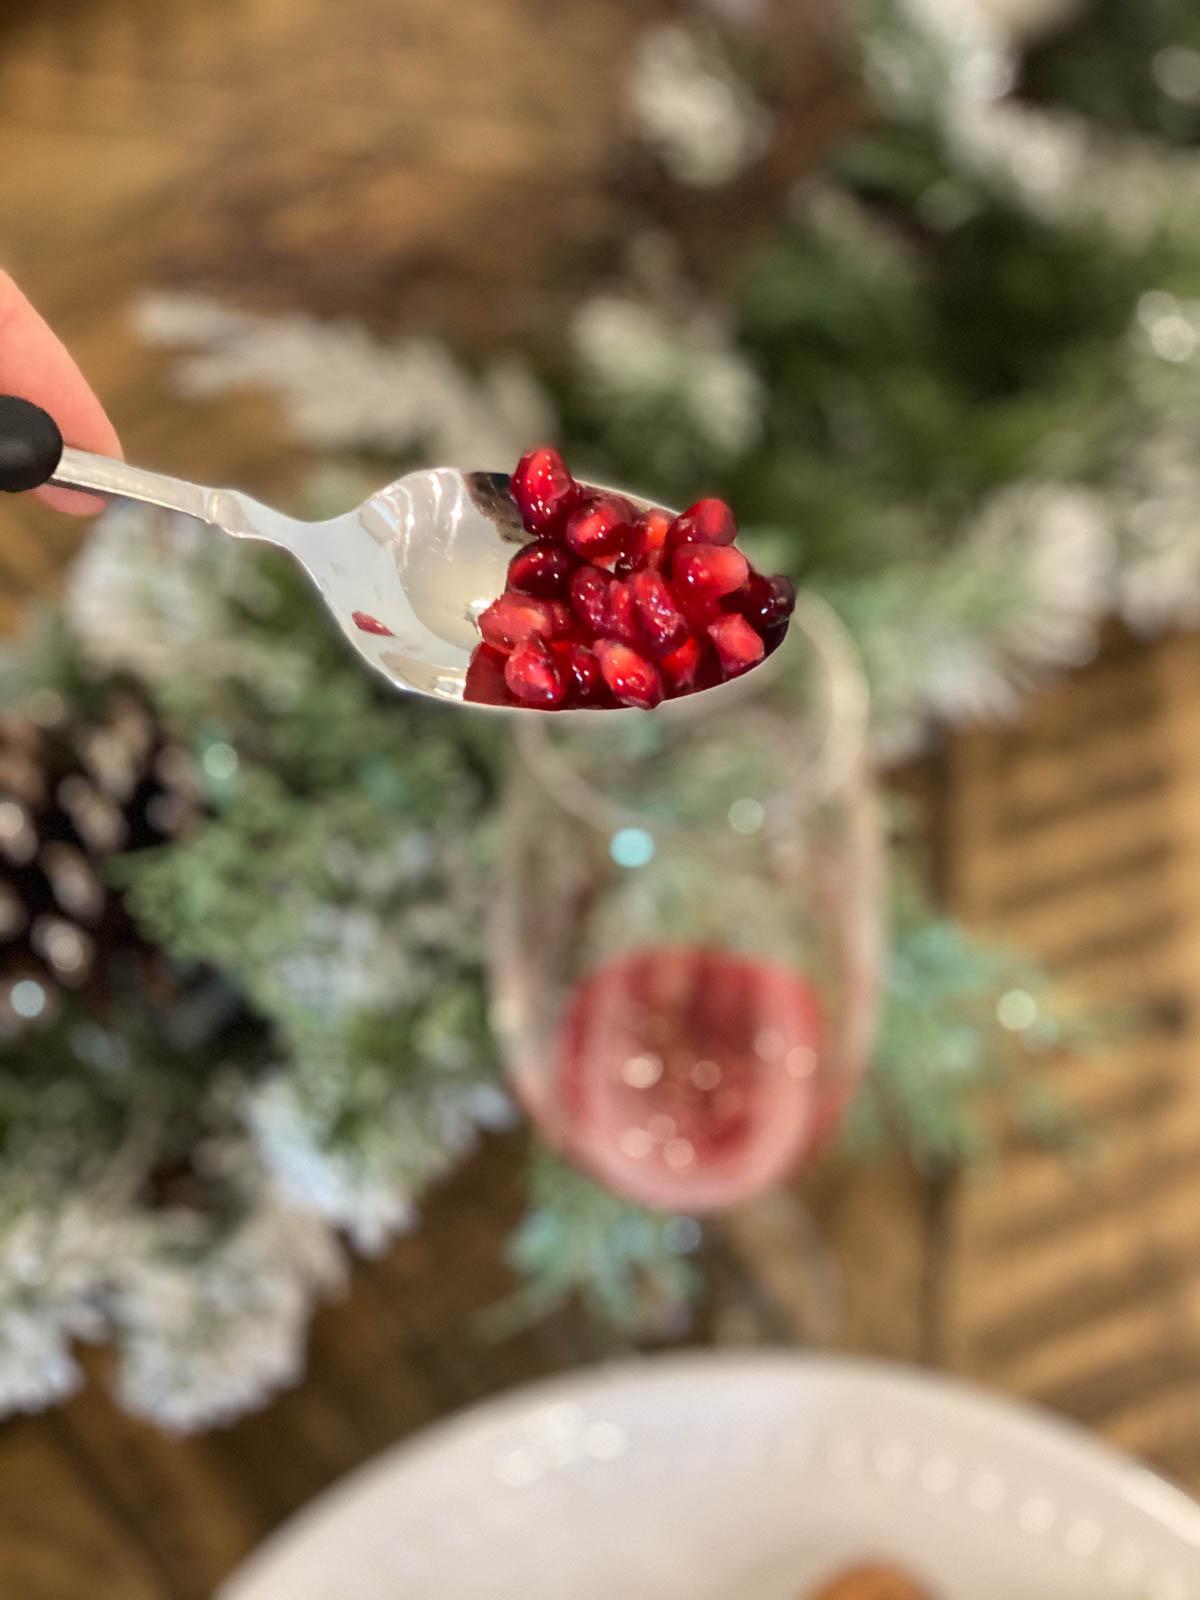 Cranberry arils on a spoon going into a glass